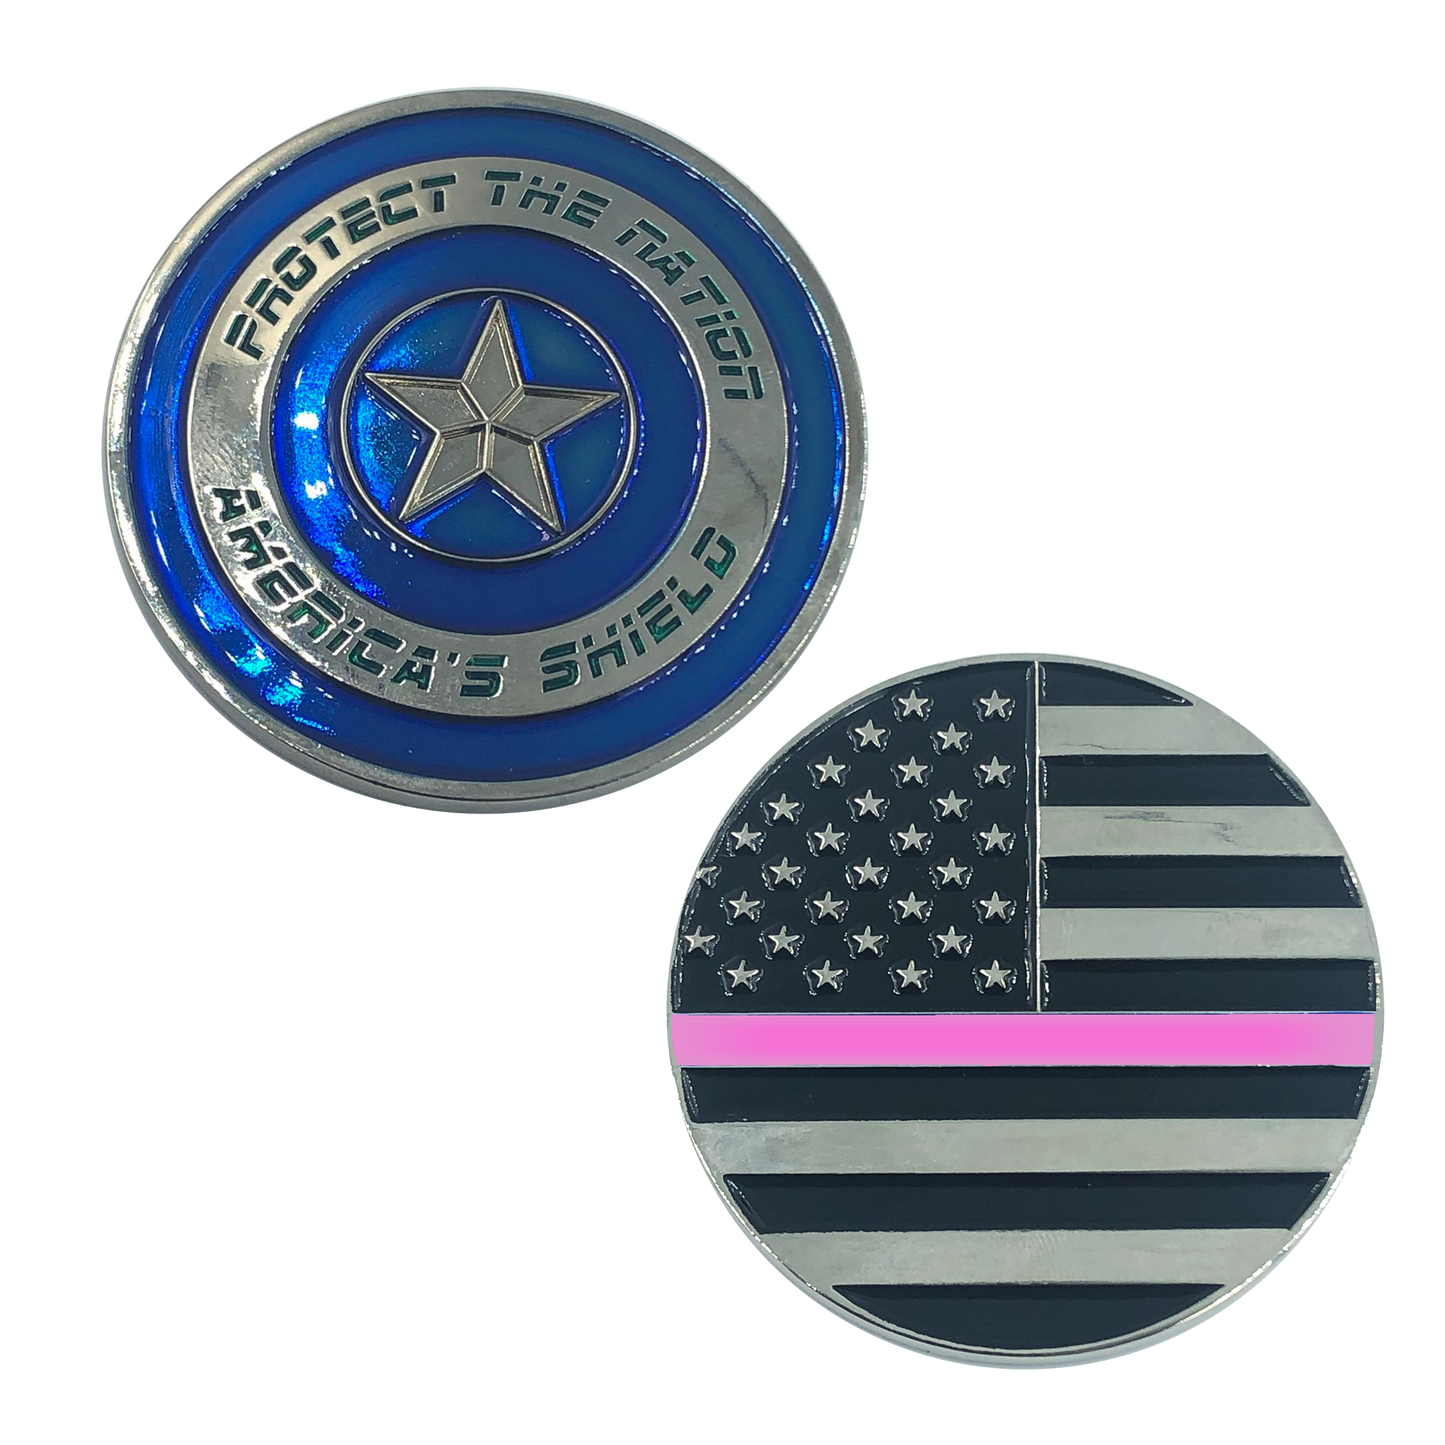 BL6-020 Thin PINK Captain America Shield Police BREAST CANCER AWARENESS CBP NYPD ATF LAPD Federal Agent